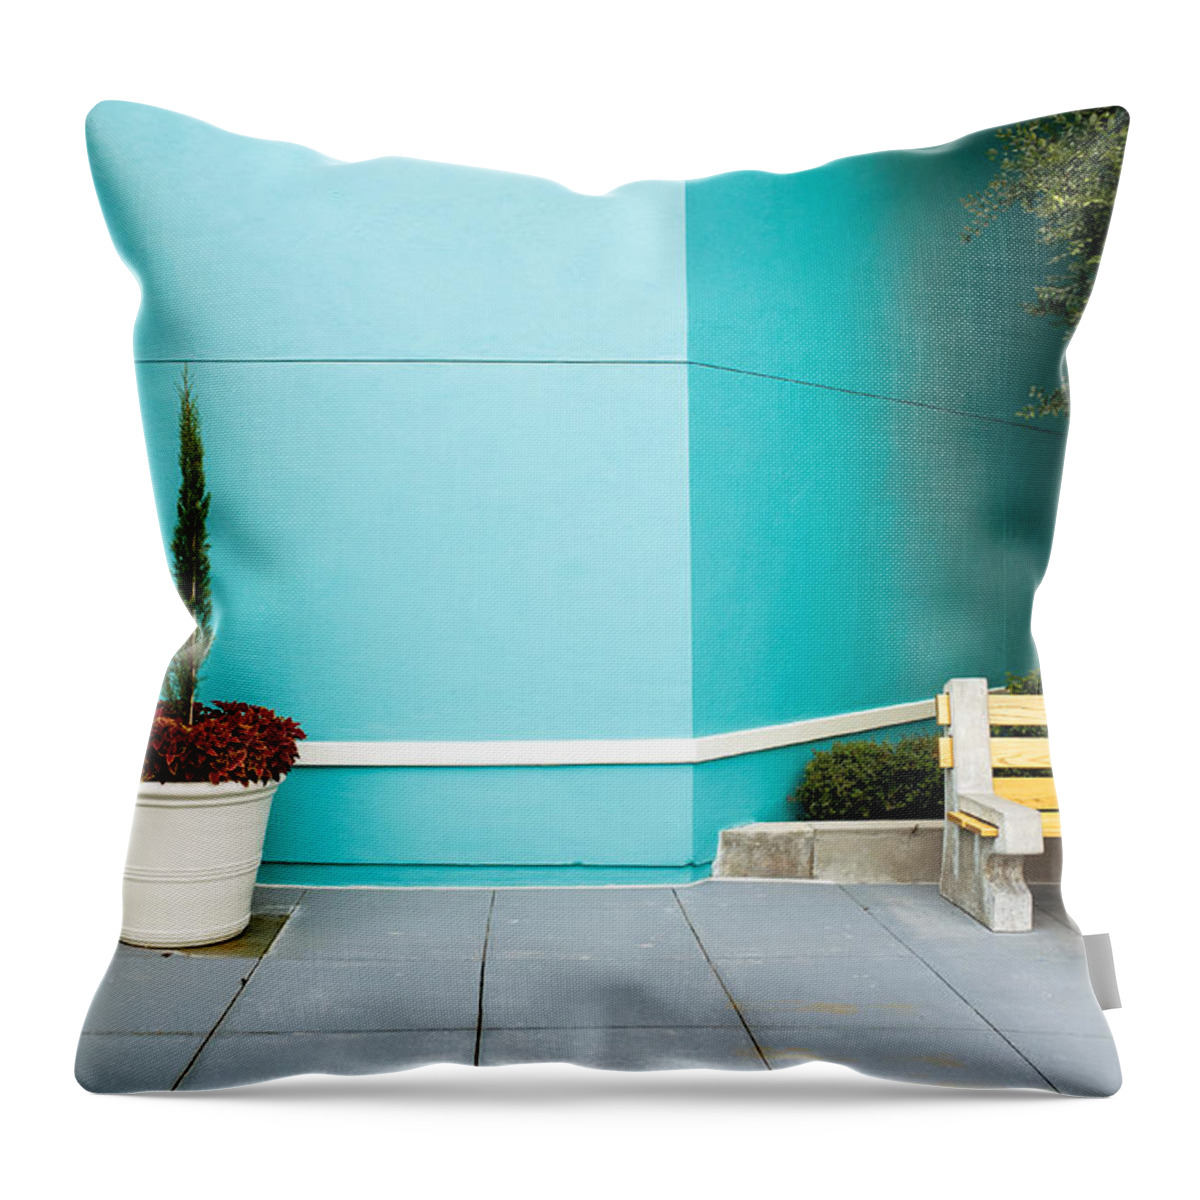 Still Life Throw Pillow featuring the photograph Seated by Nick Barkworth